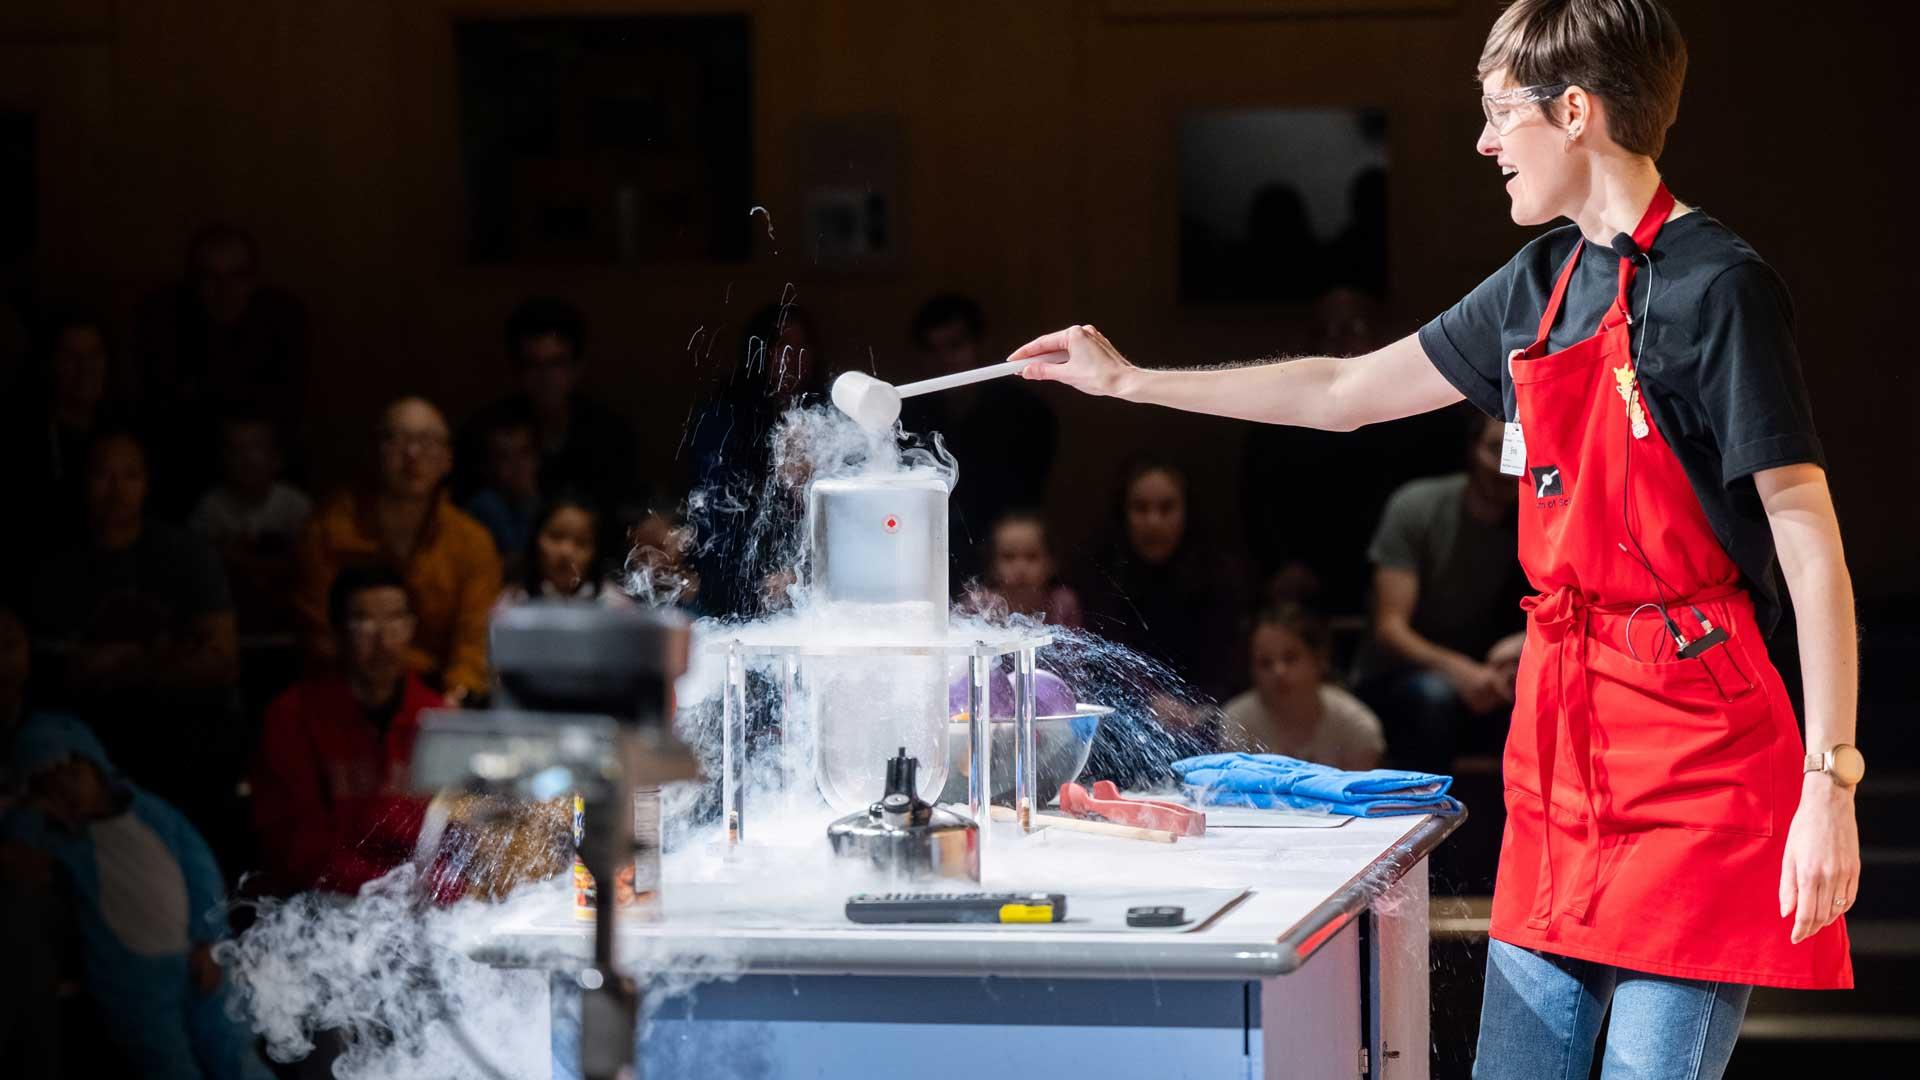 A museum eductaor conducting a science experiment with dry ice.